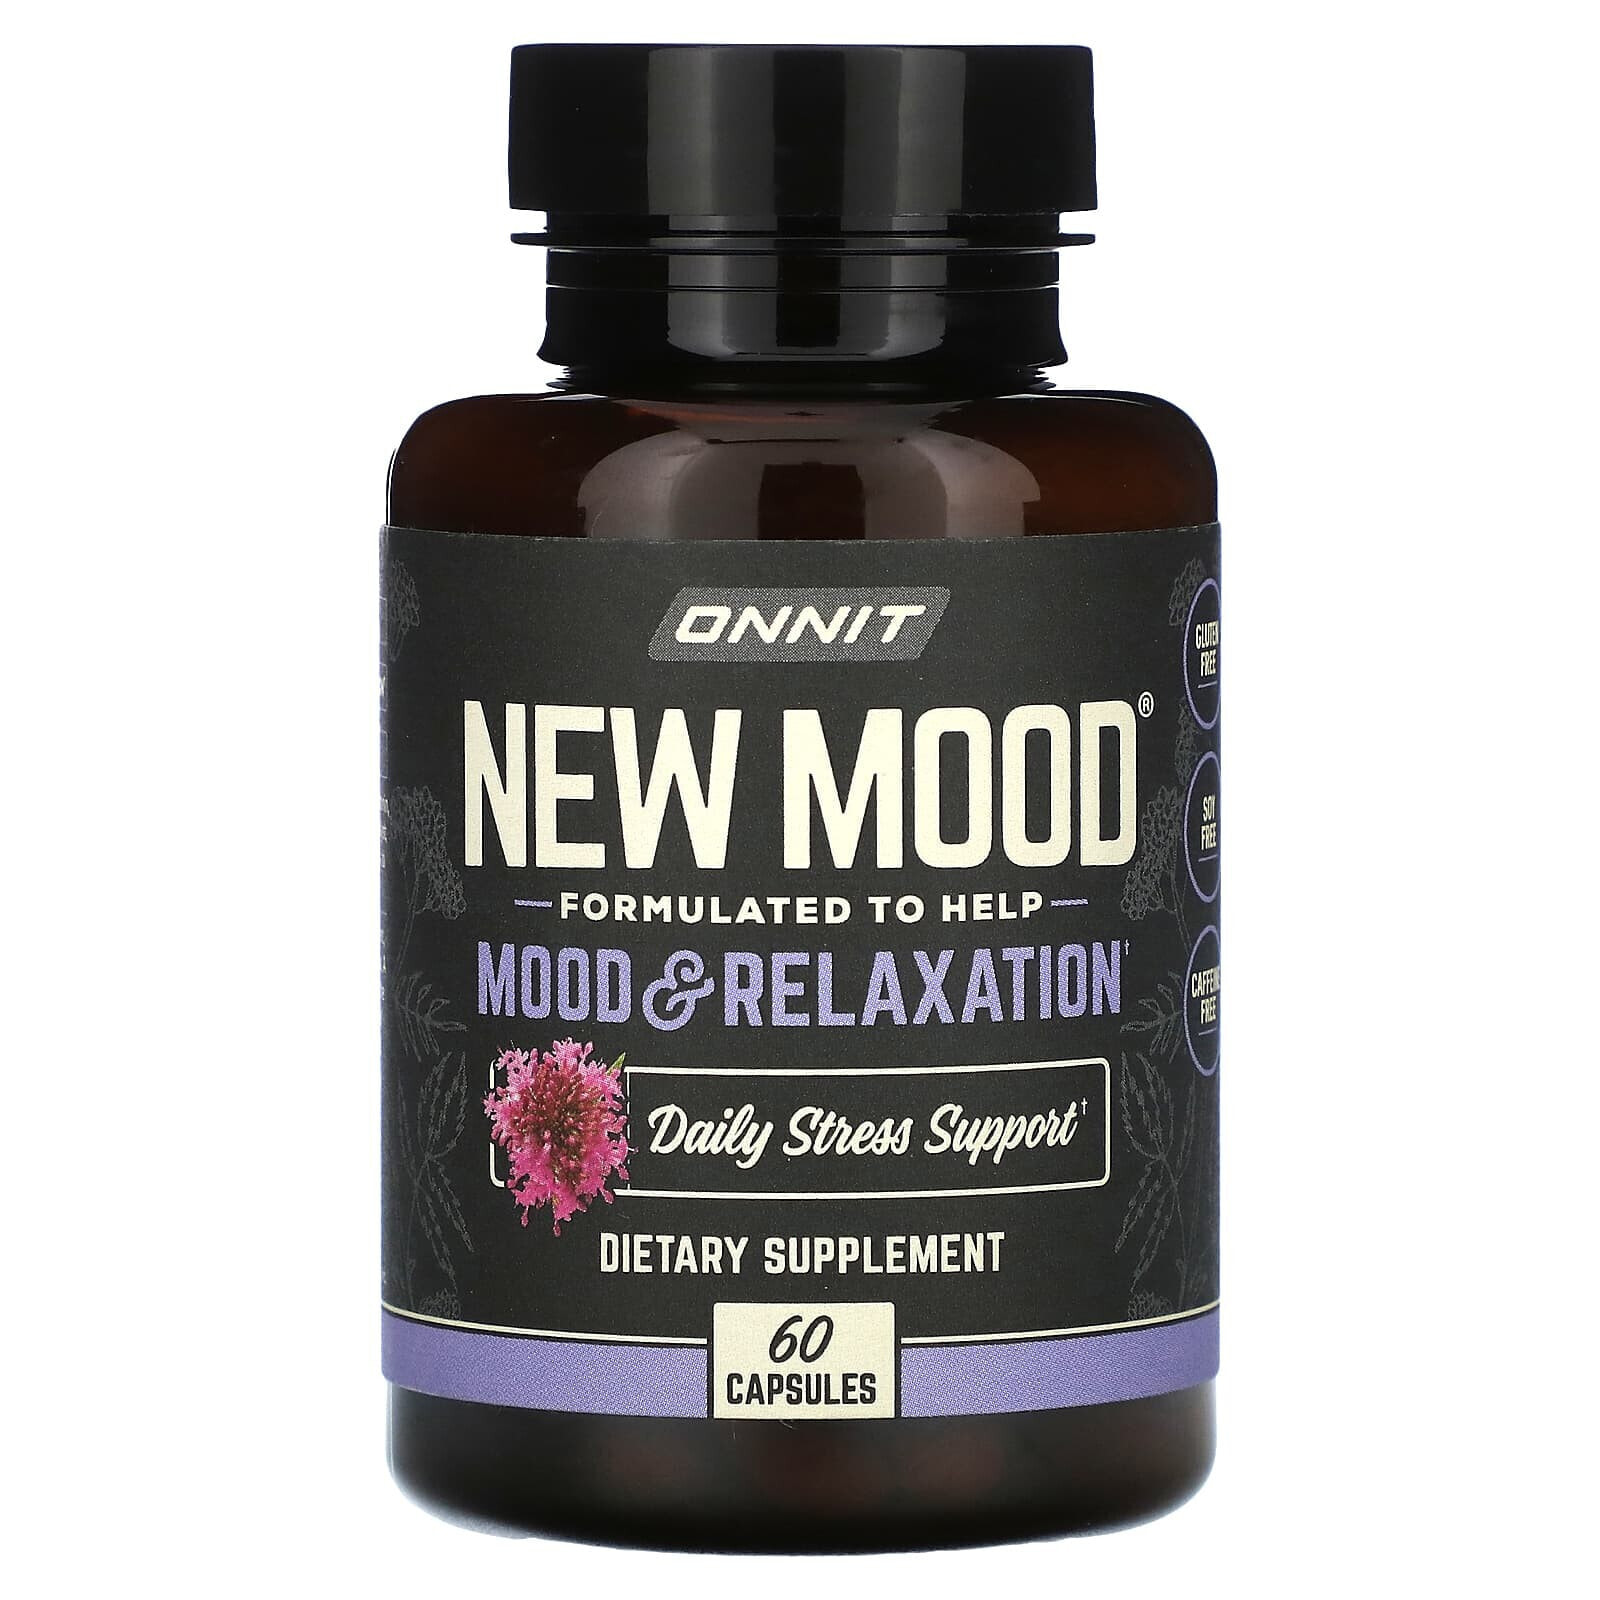 New Mood, Mood & Relaxation, 60 Capsules